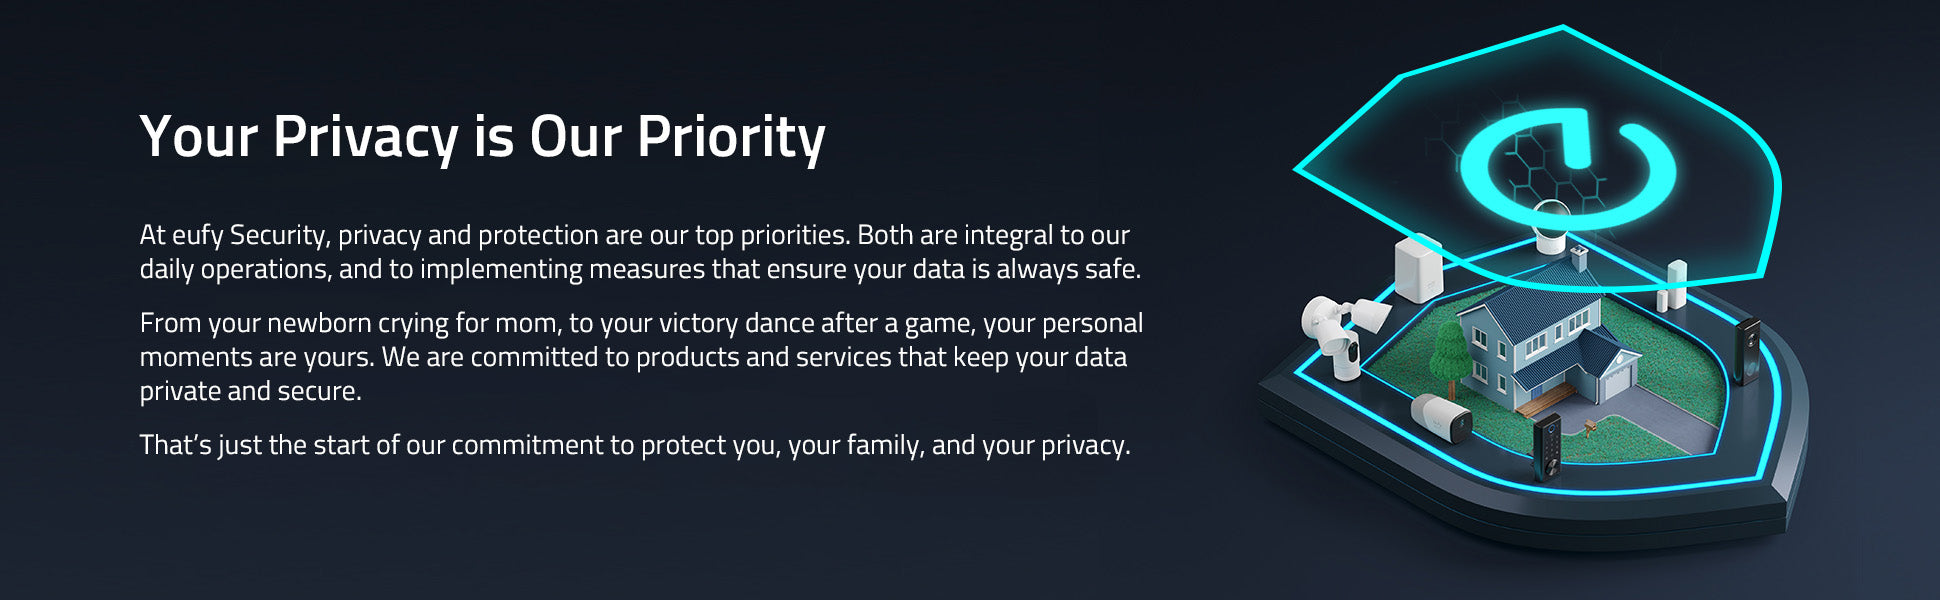 Your_Privacy_is_Our_Priority_fa3c17f0-5235-47aa-be79-0372cd8914b2